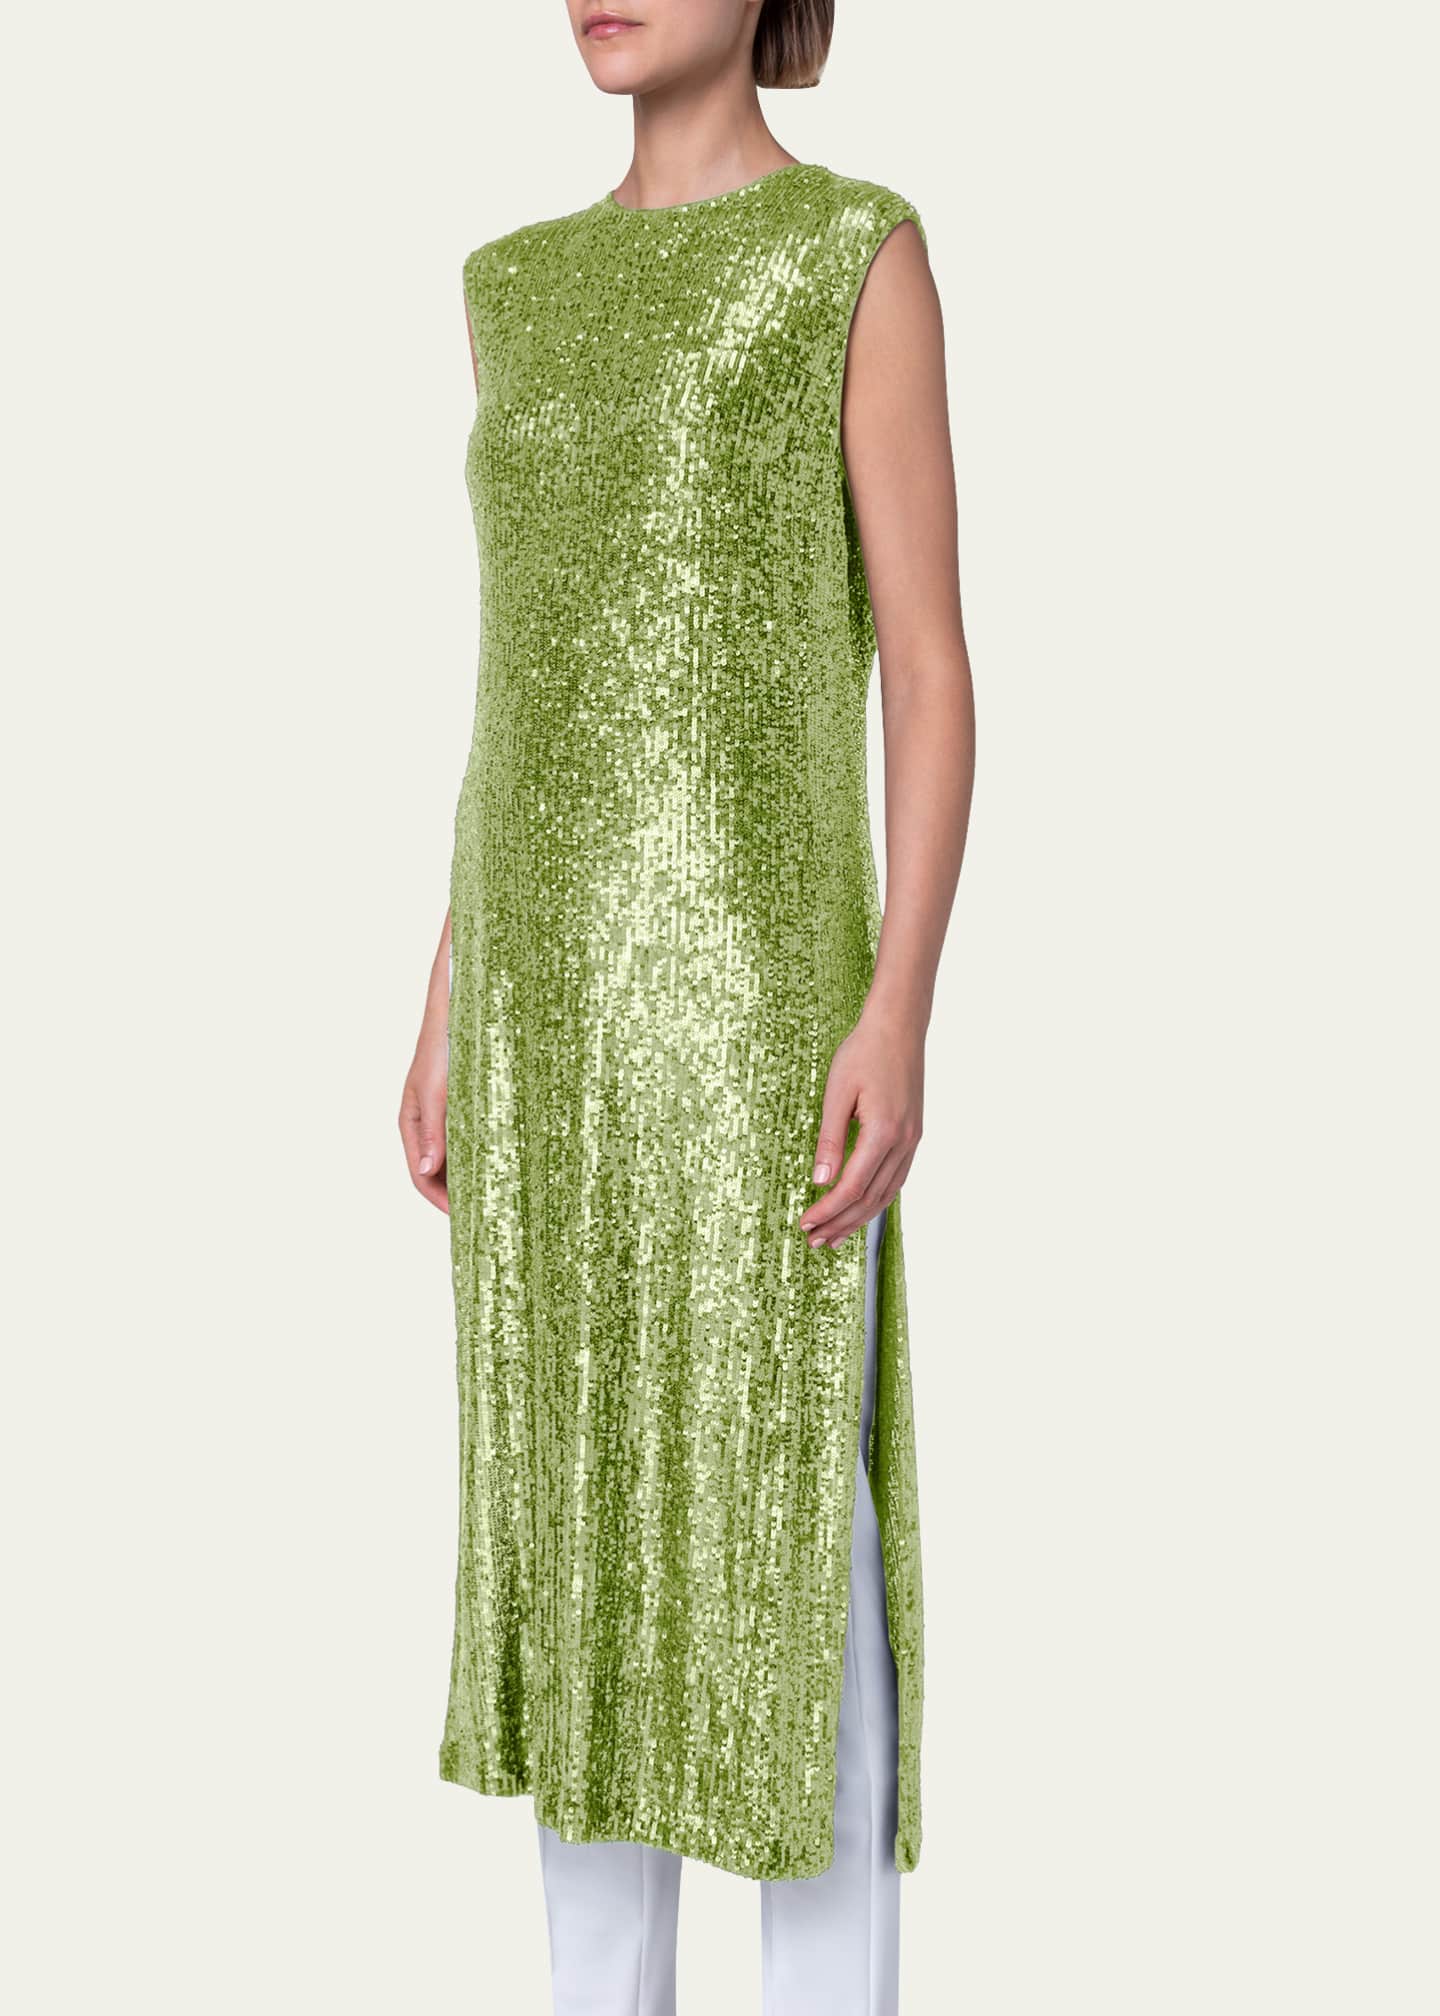 Akris Sequin Long Tunic with Side Slits - Bergdorf Goodman